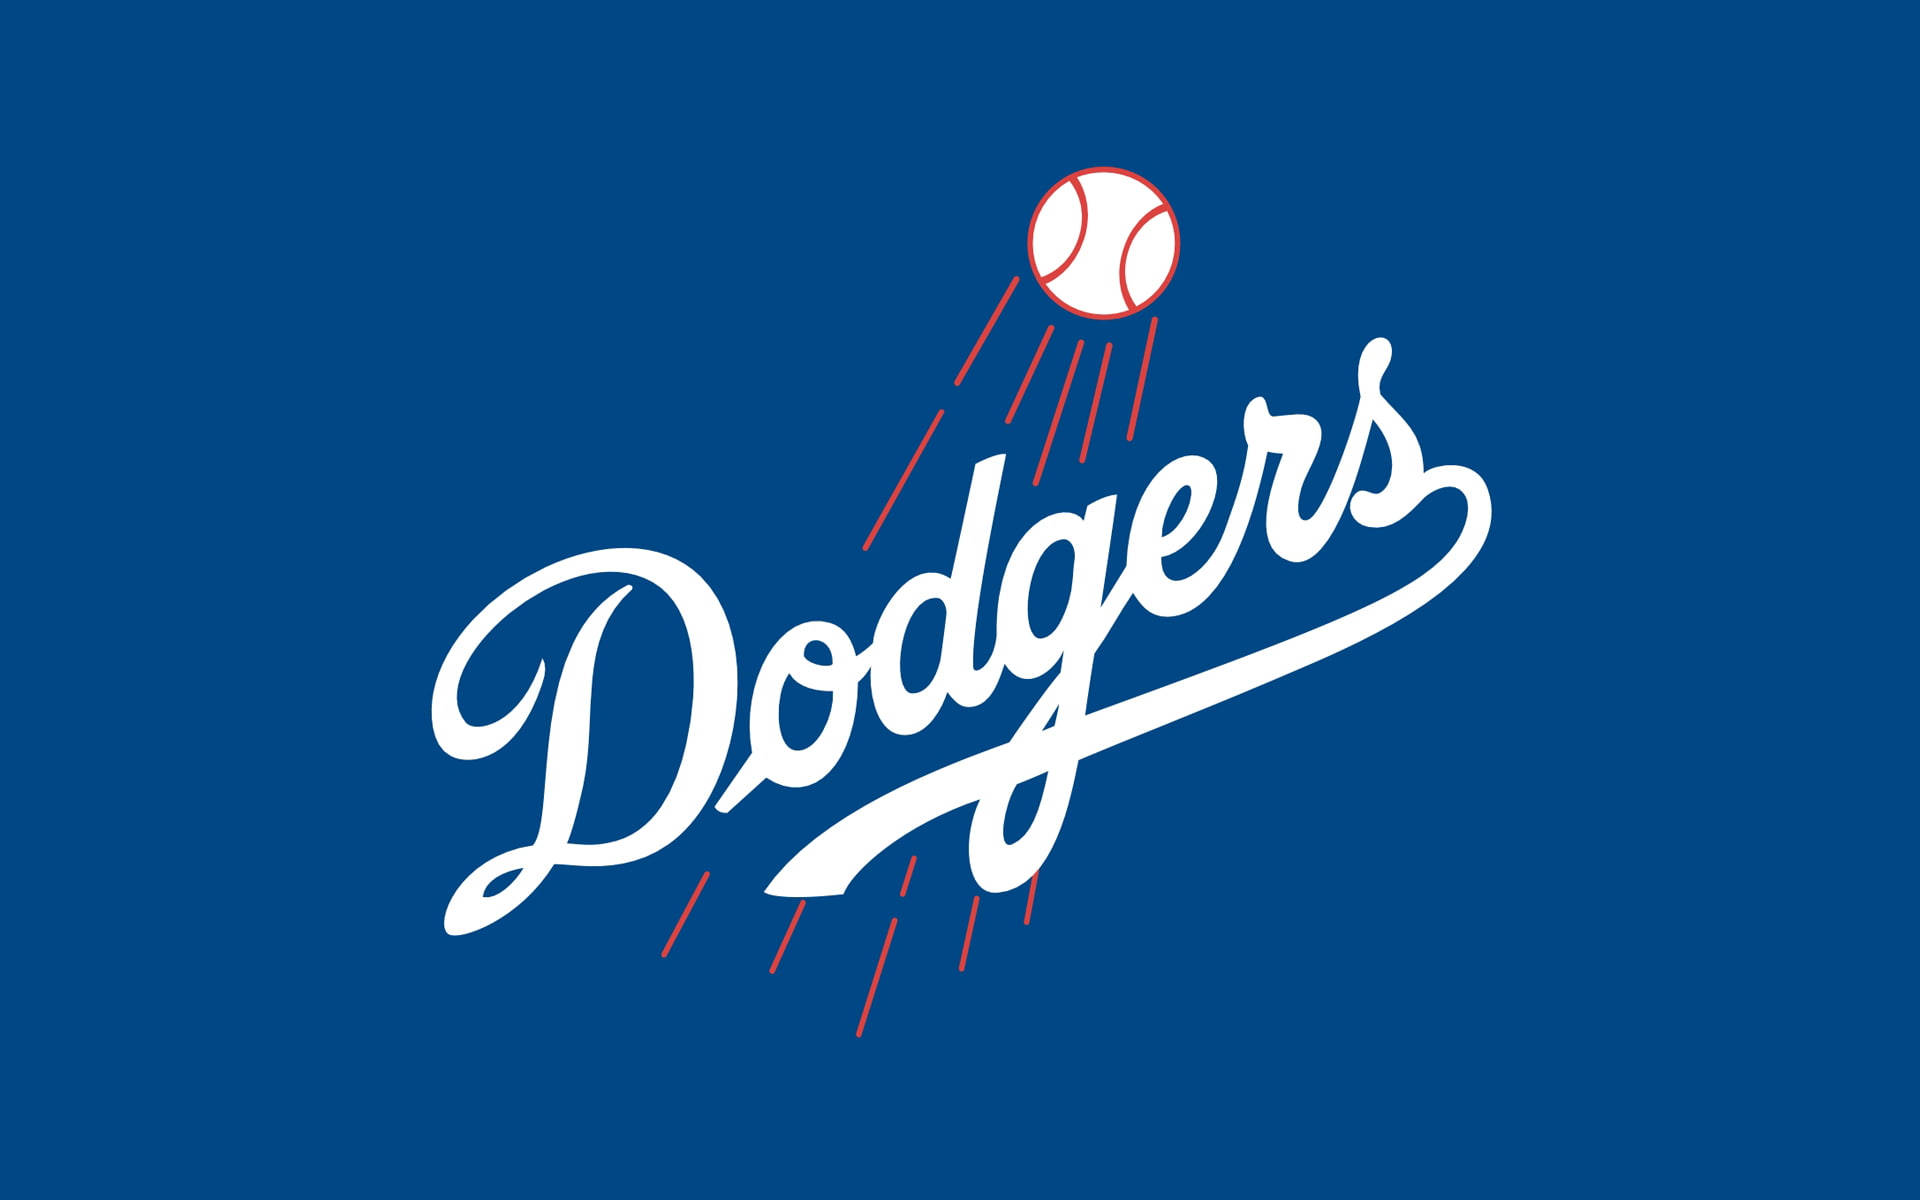 200+] Los Angeles Dodgers Wallpapers